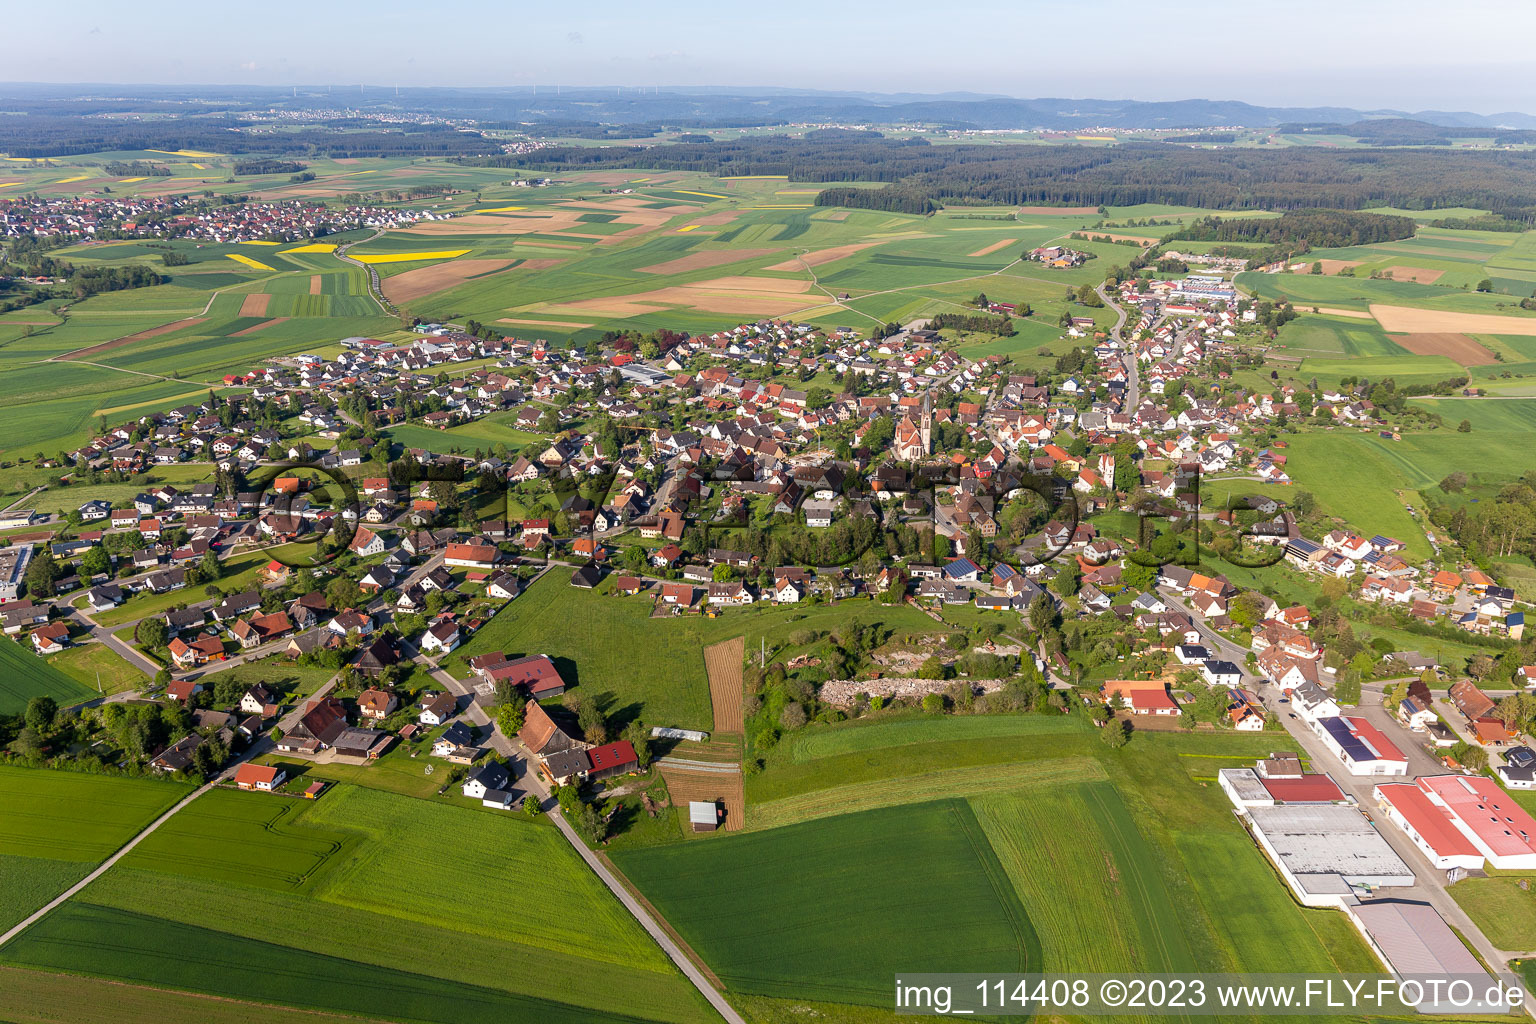 Agricultural land and field borders surround the settlement area of the village in Winzeln in the state Baden-Wurttemberg, Germany